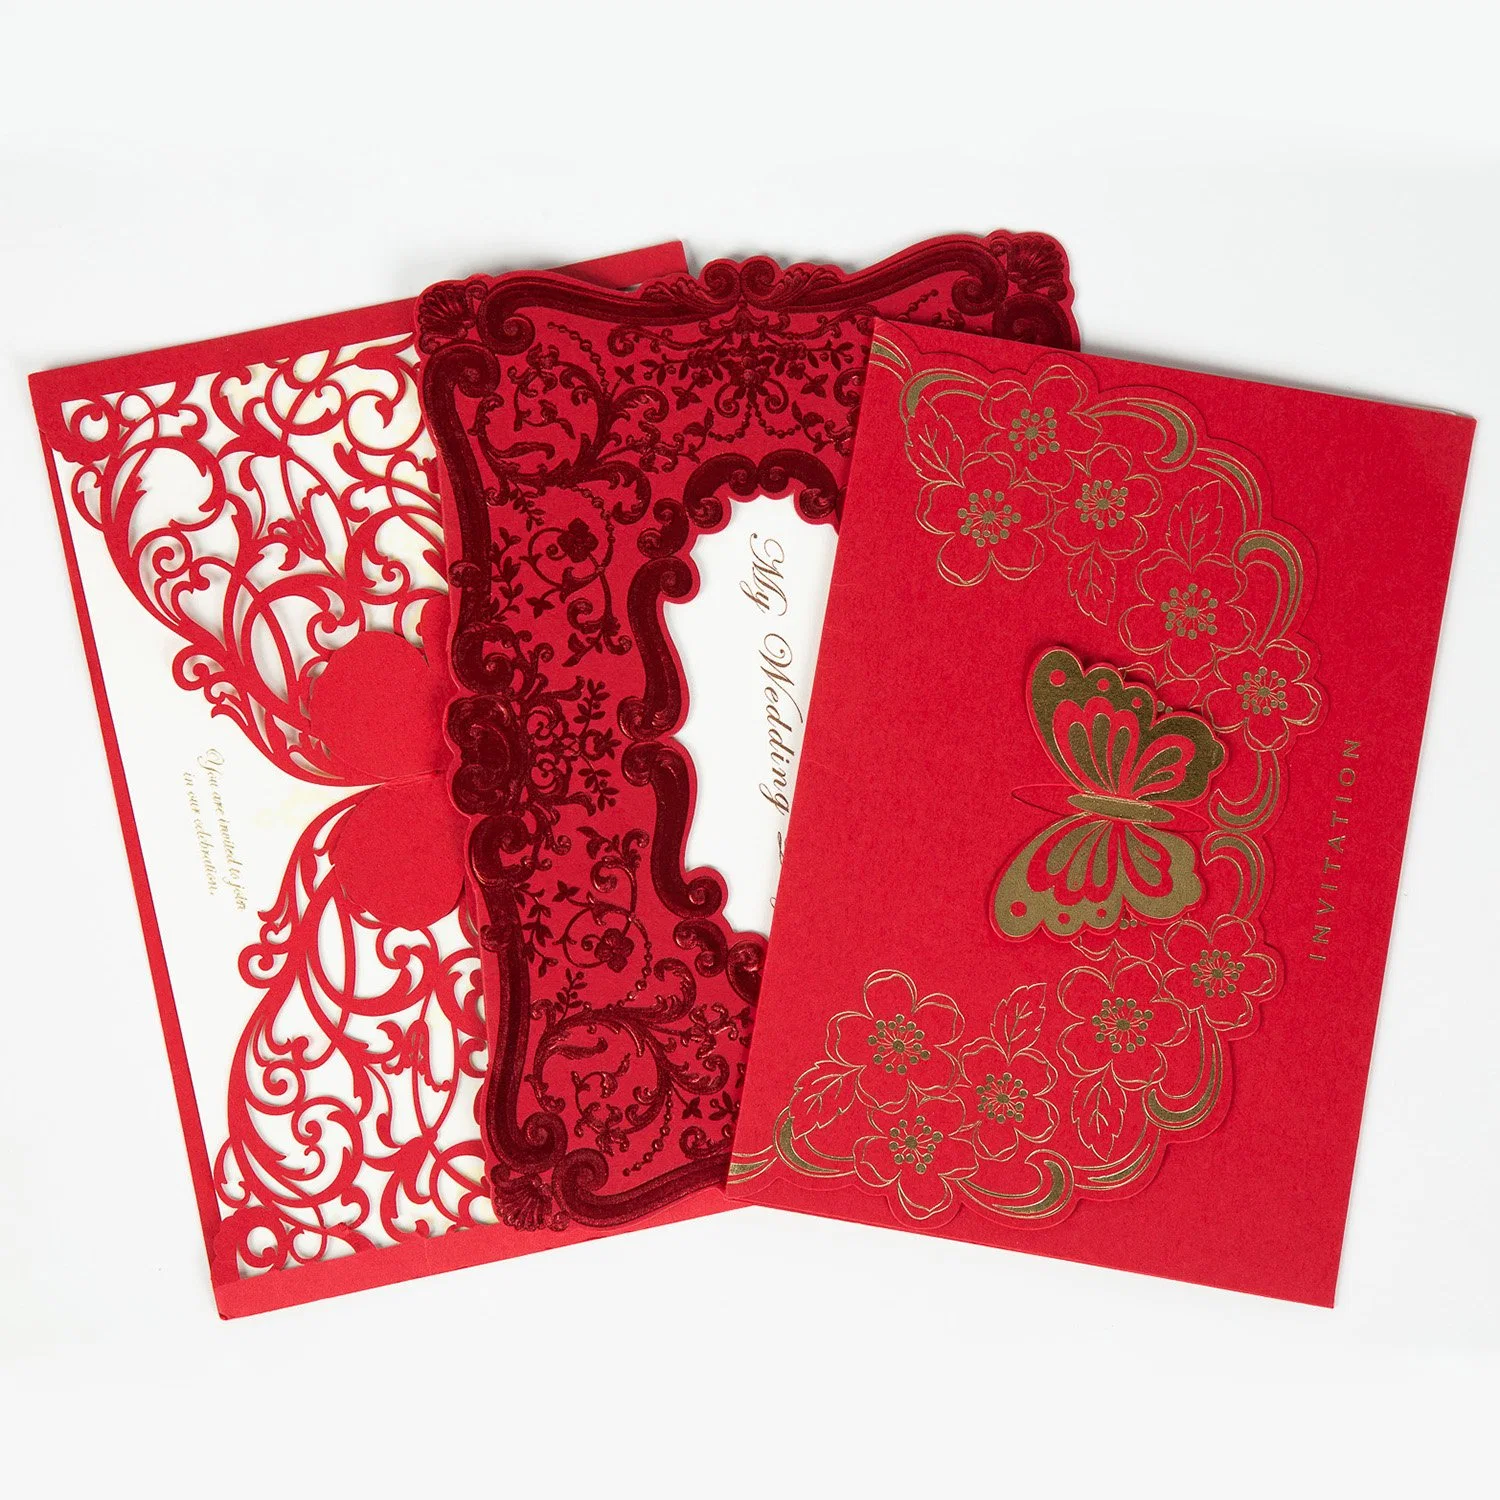 China Wholesale New Design Hollow Carve Message Card Creative Gift Greeting Cards Postcards Wedding Invitations New Year Birthday Party Invitation Card